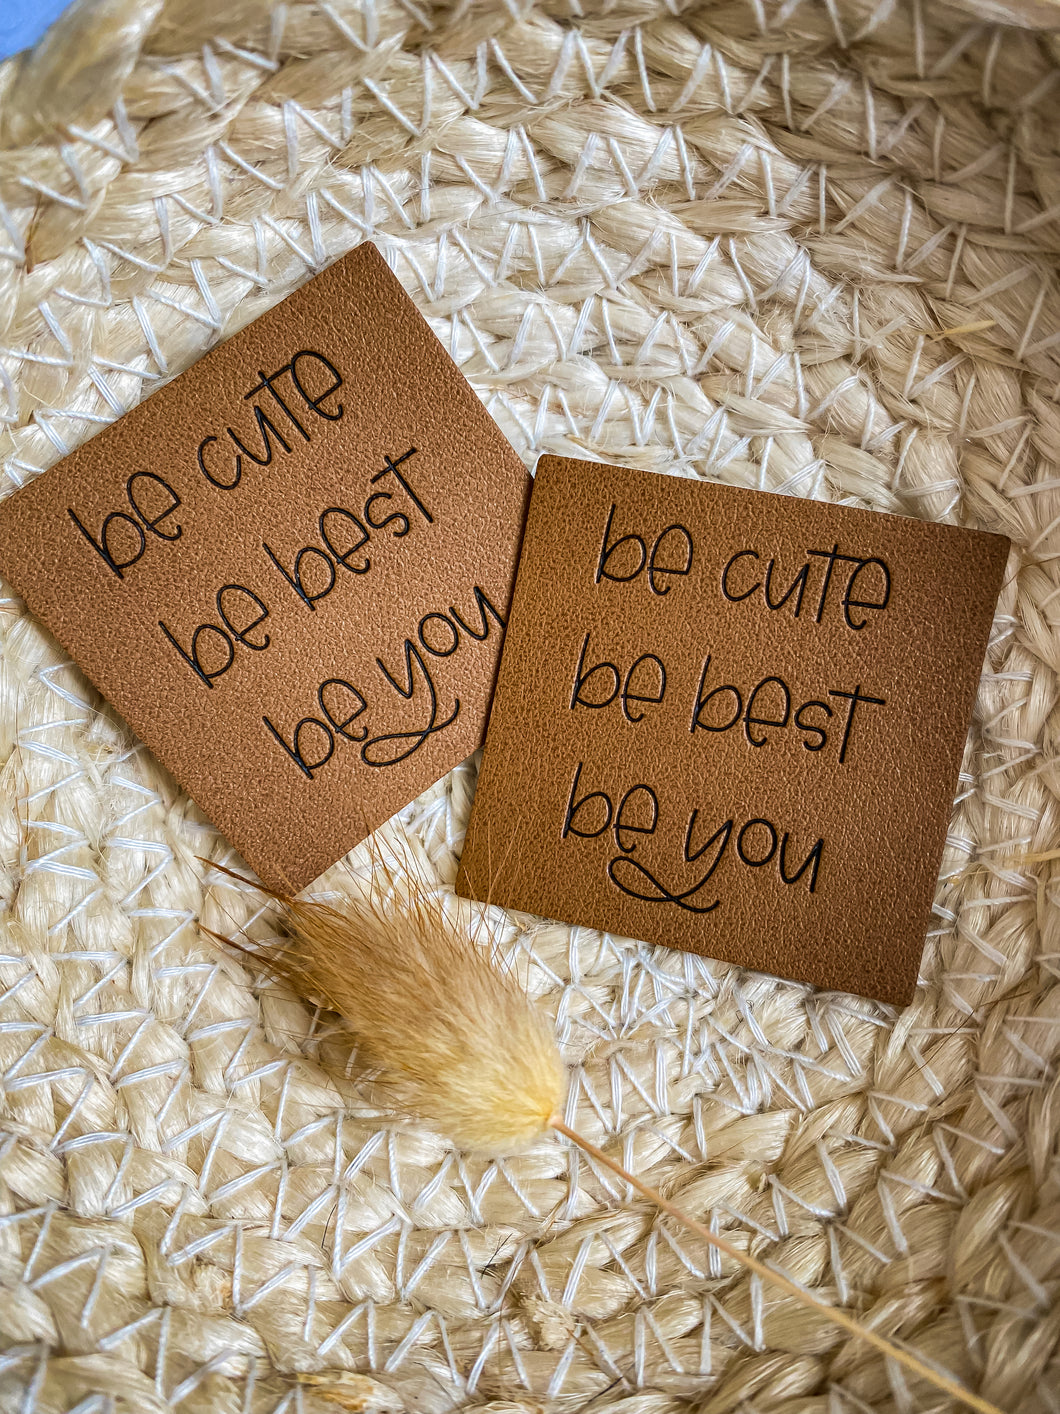 Be cute, be best, be you Label